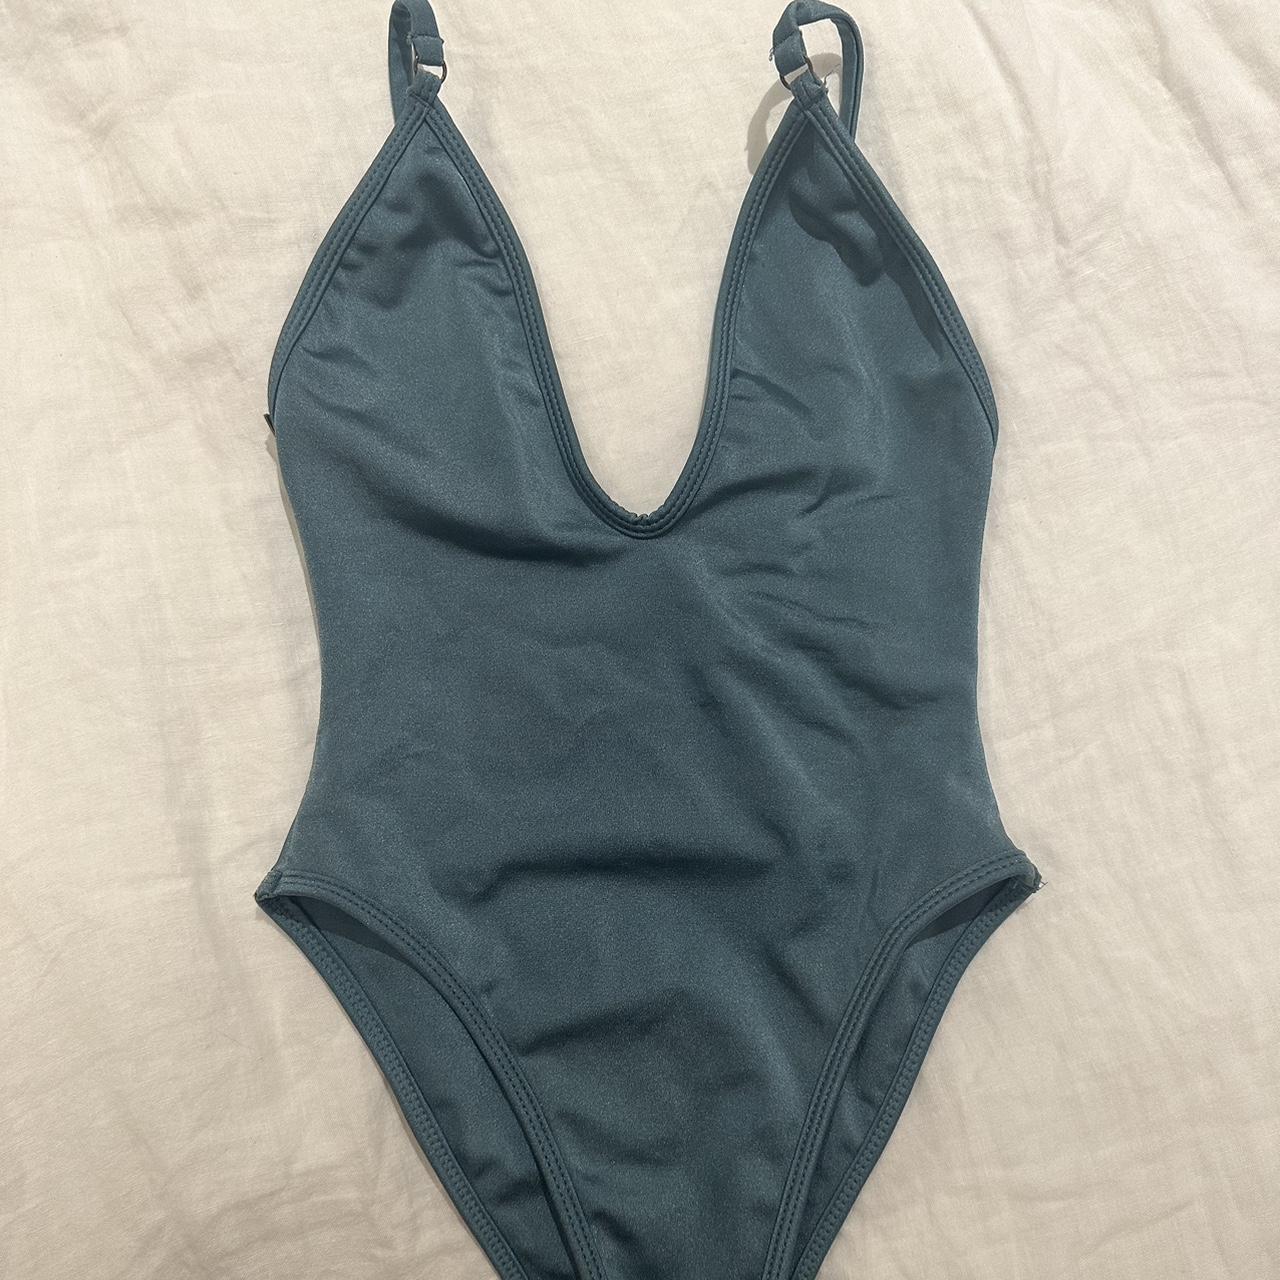 gooseberry one piece blue lagoon wanting to swap for... - Depop